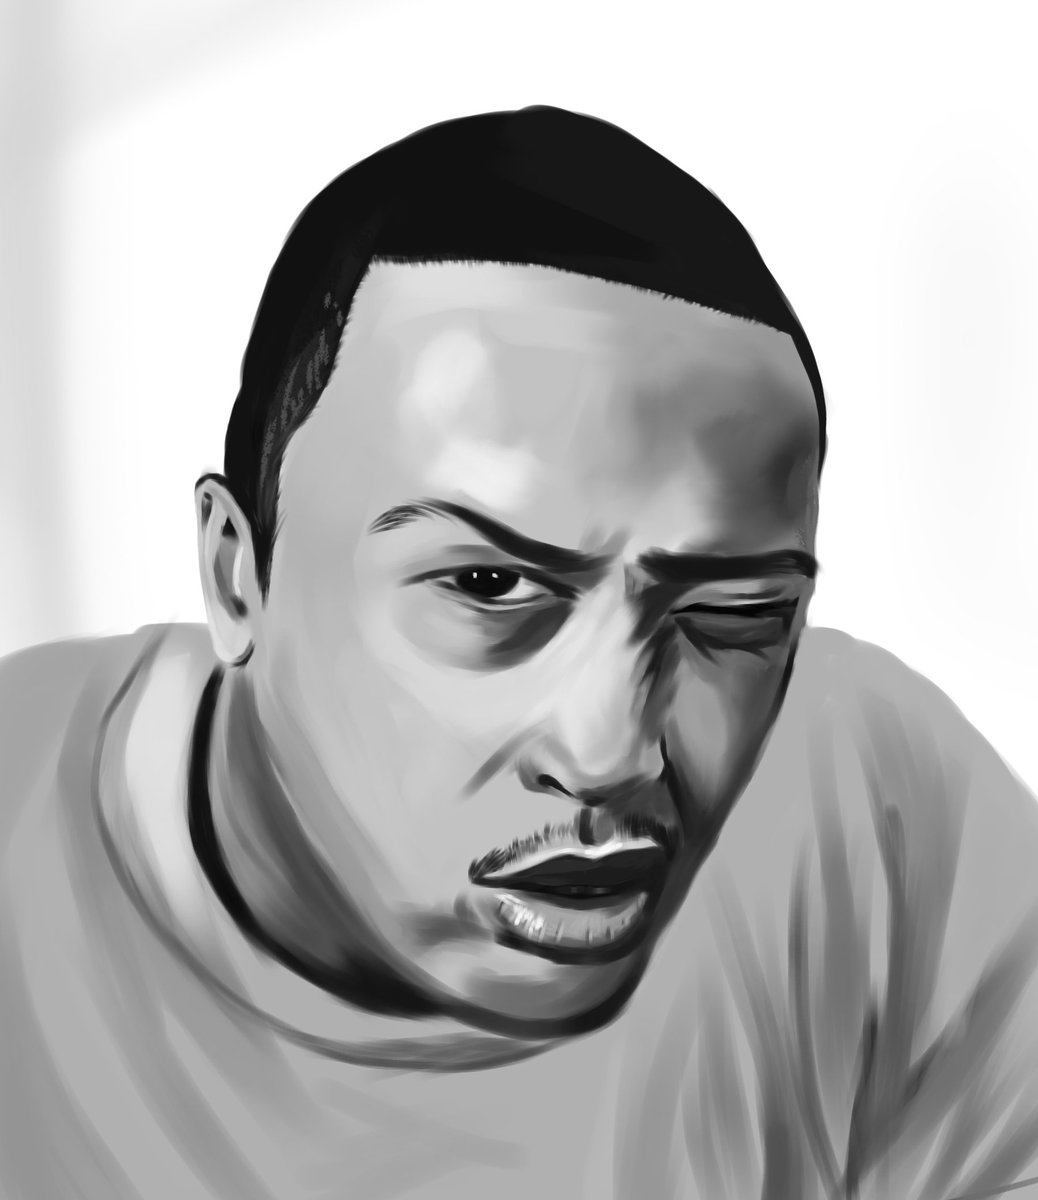 Drawing of  Dr Dre #artmoots #illustration #drawing #draw #envywear #PleaseForgiveMe #picture #artist #sketch #sketchbook #paper #pen #pencil  #beautiful #instagood #imm4u #gallery #art #akhhyyl #masterpiece #creative #photooftheday